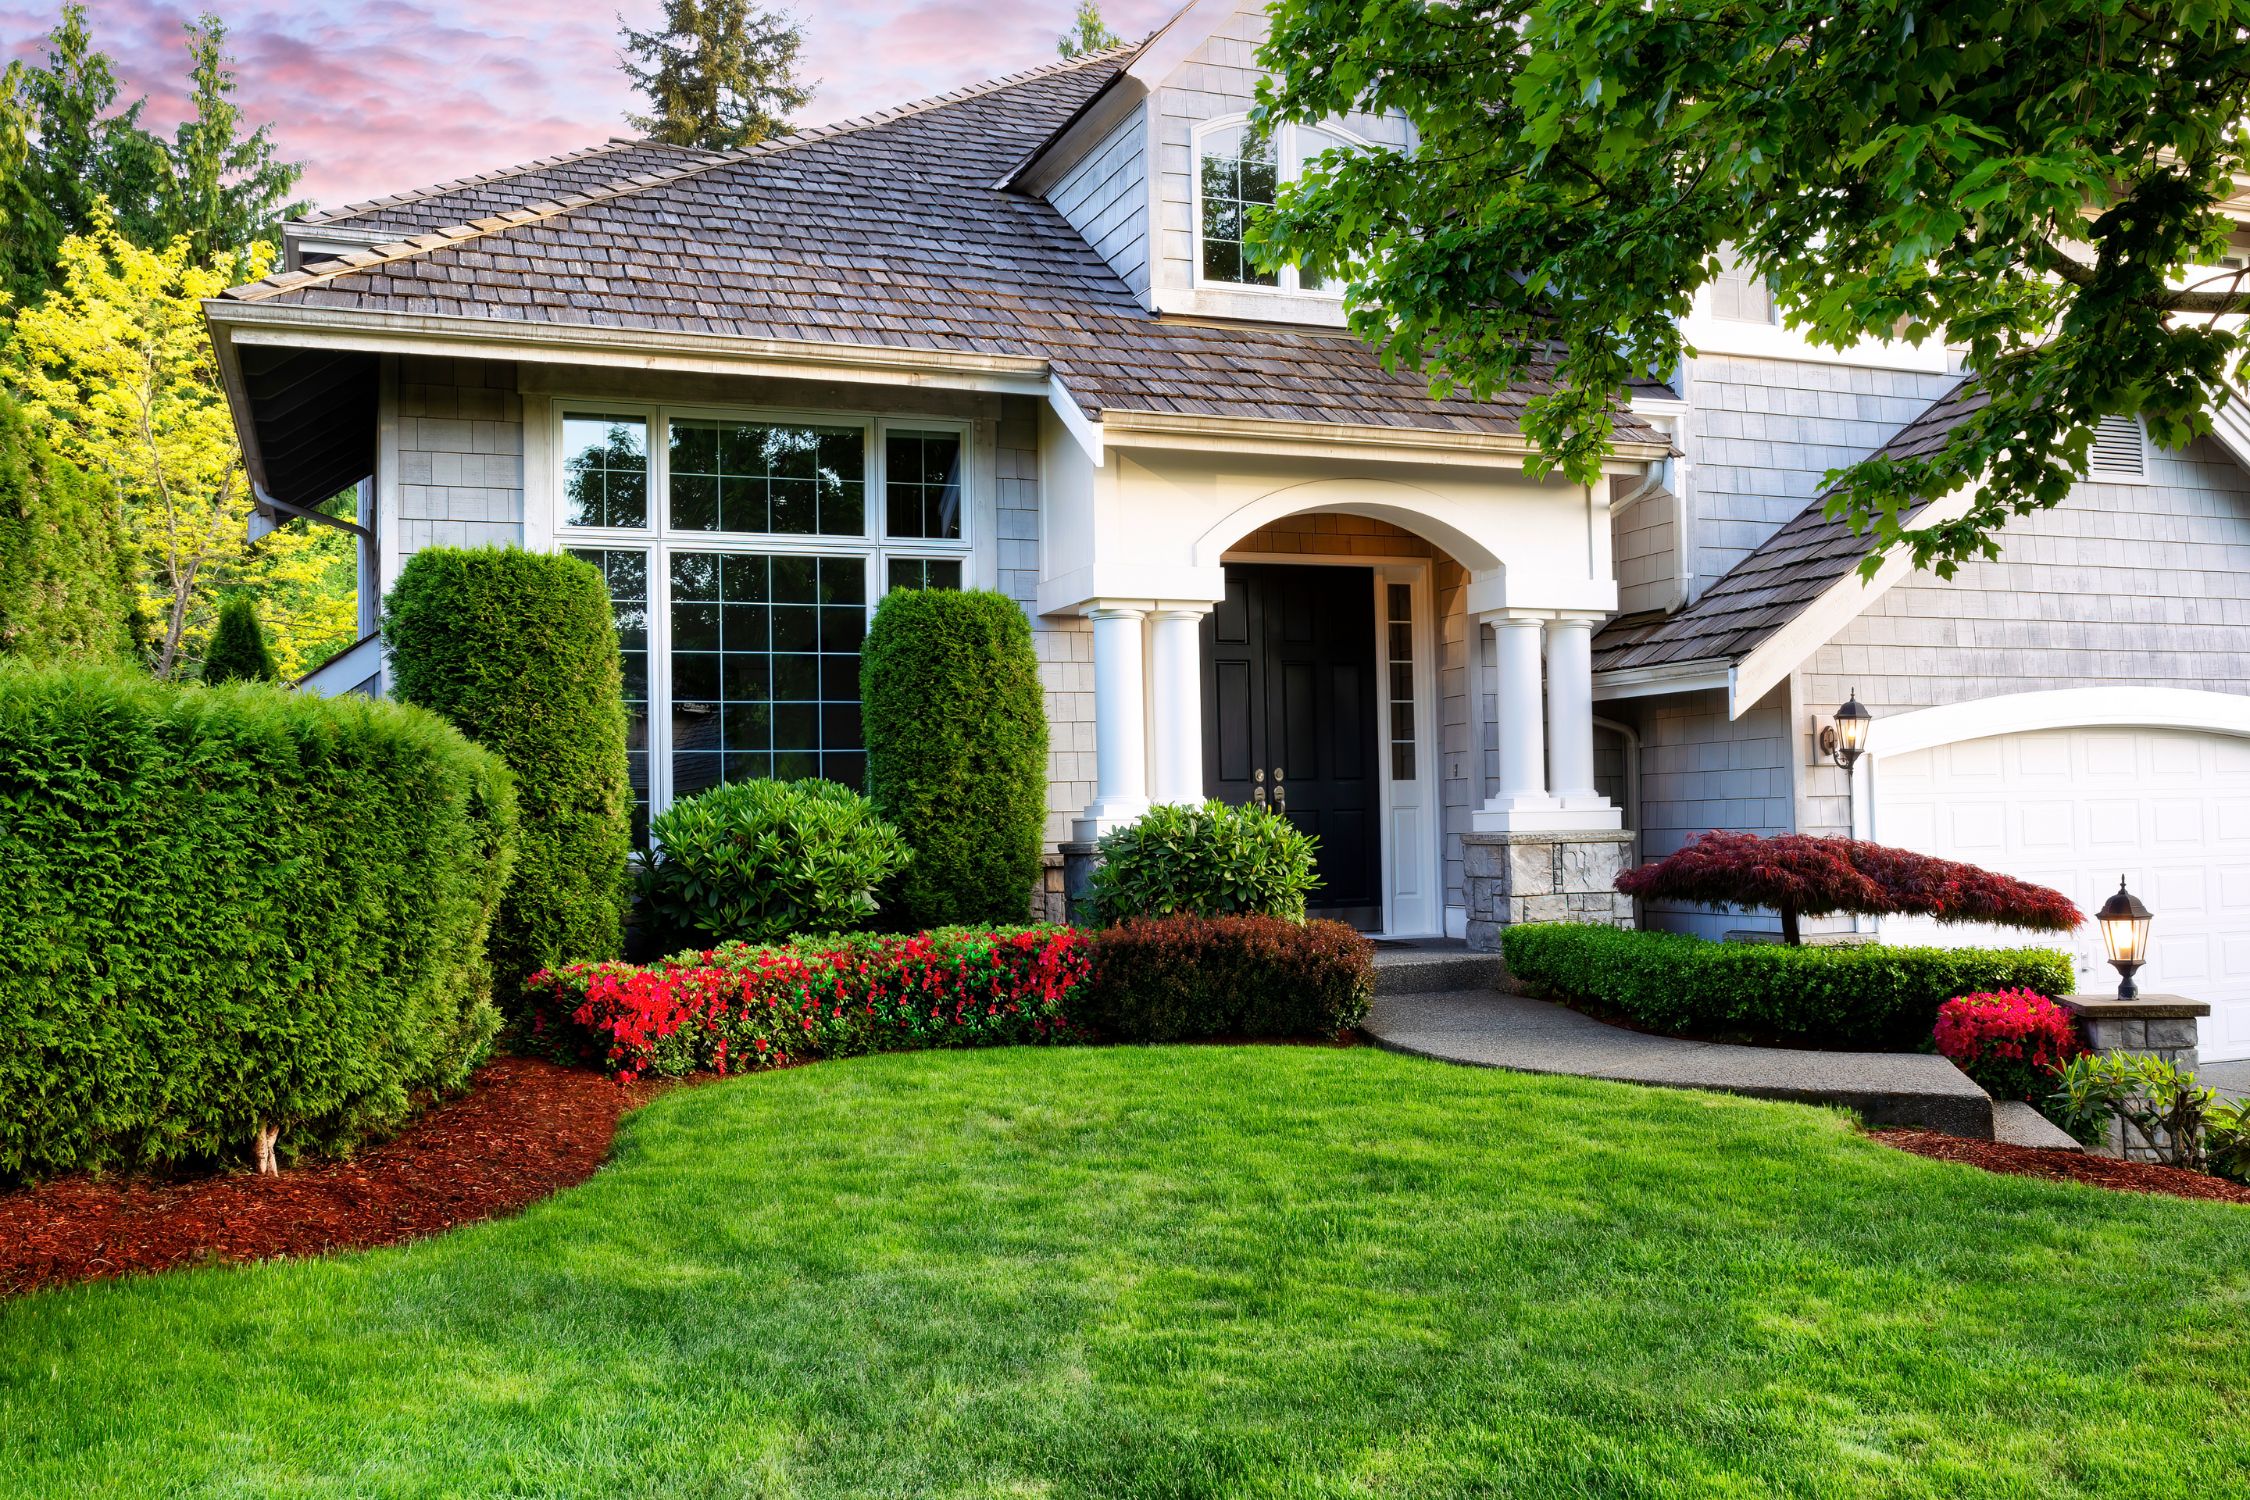 The Benefits of Keeping a Well-Manicured Lawn